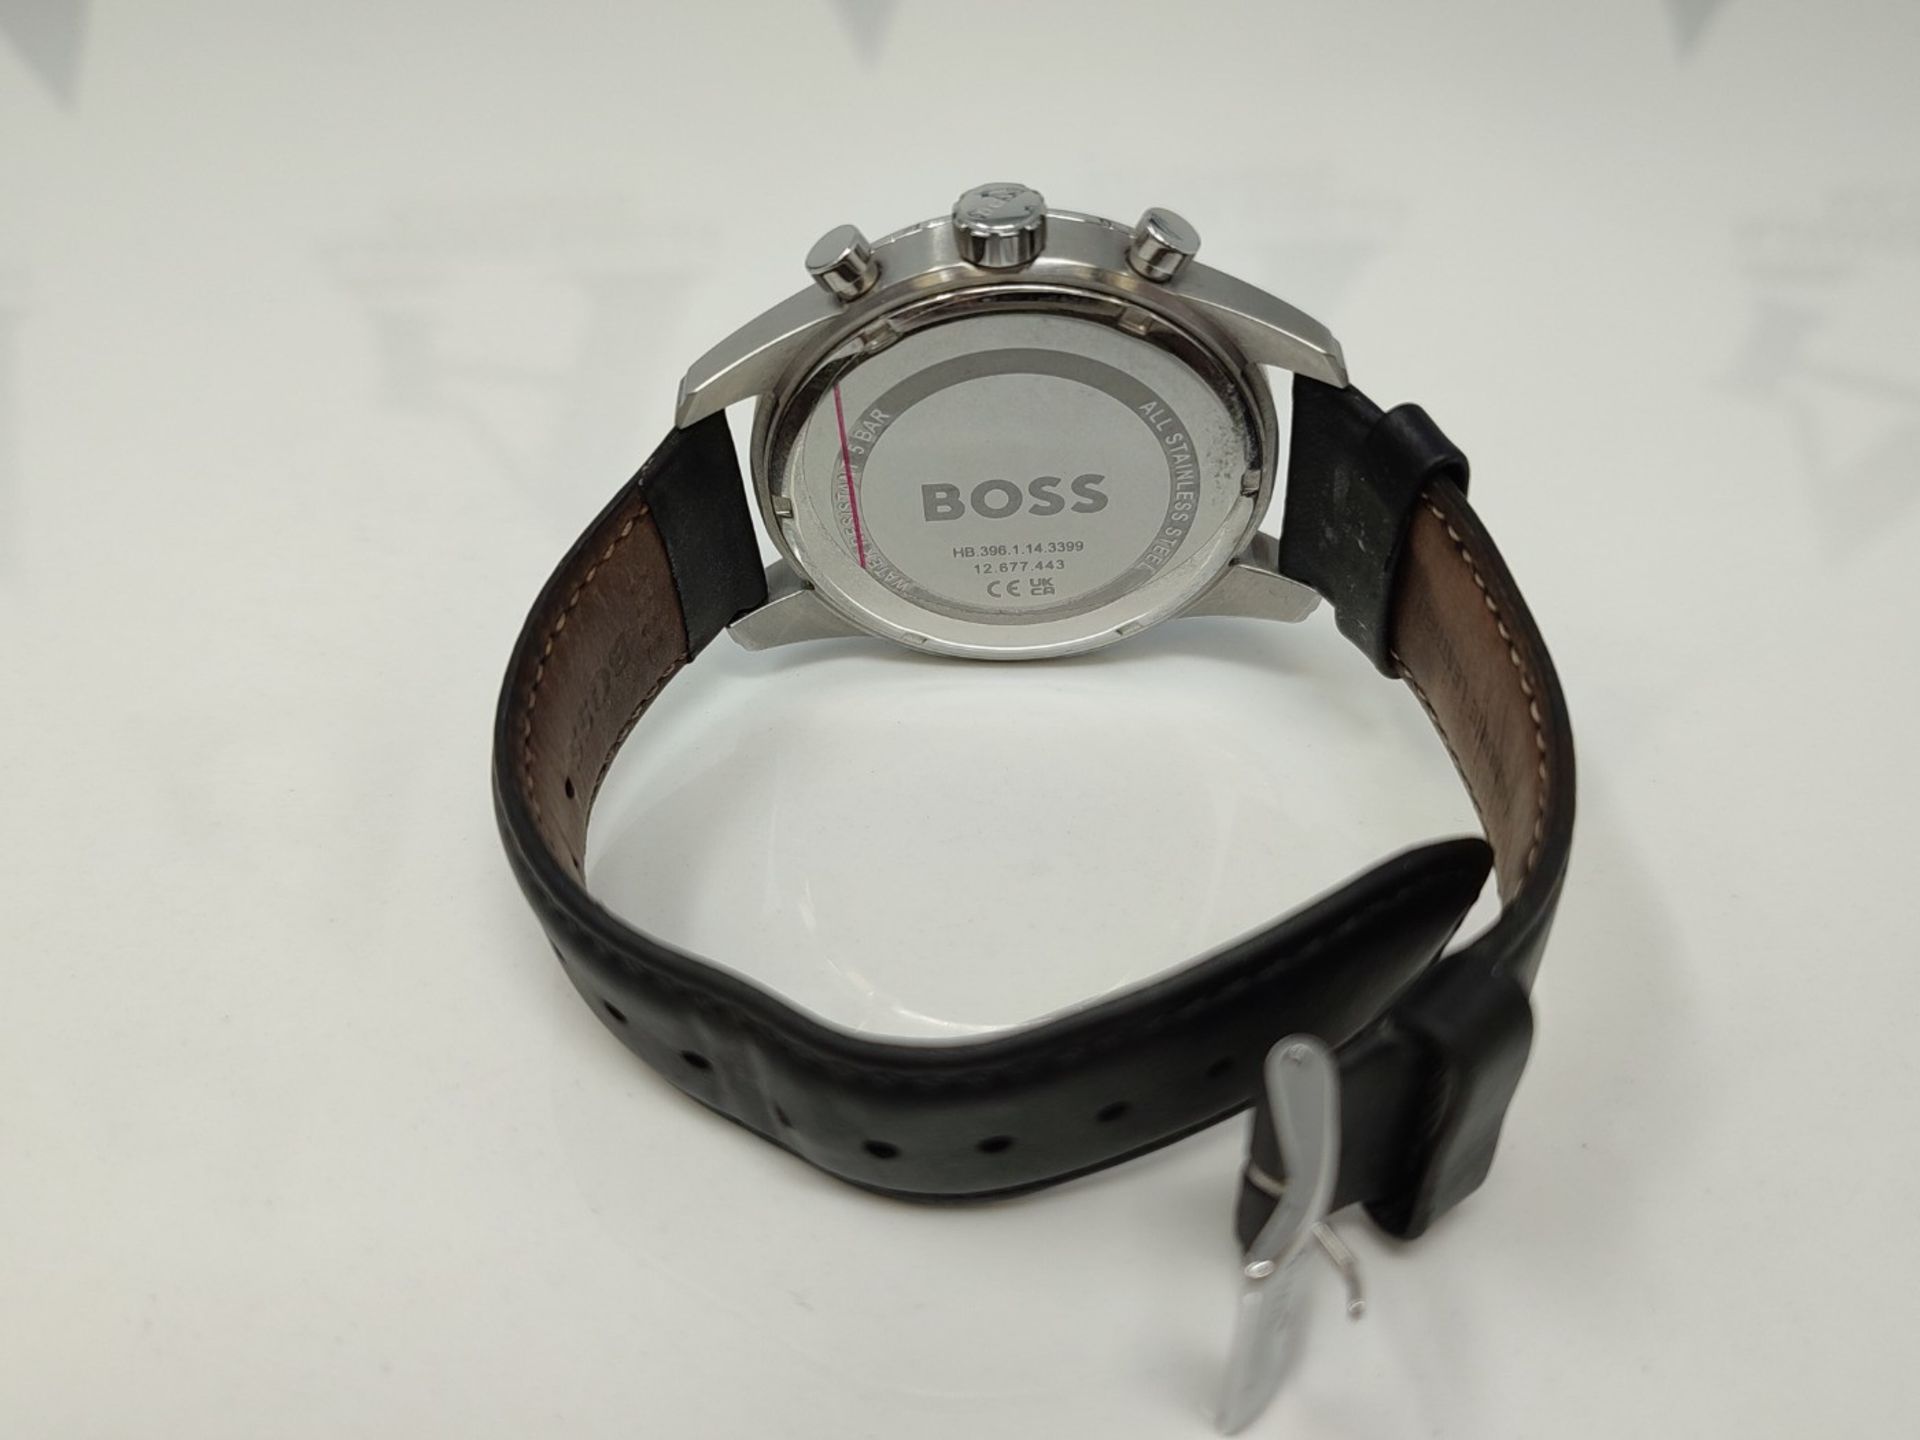 RRP £239.00 BOSS Chronograph Quartz Watch for Men with Black Leather Strap - 1513782 - Image 6 of 6